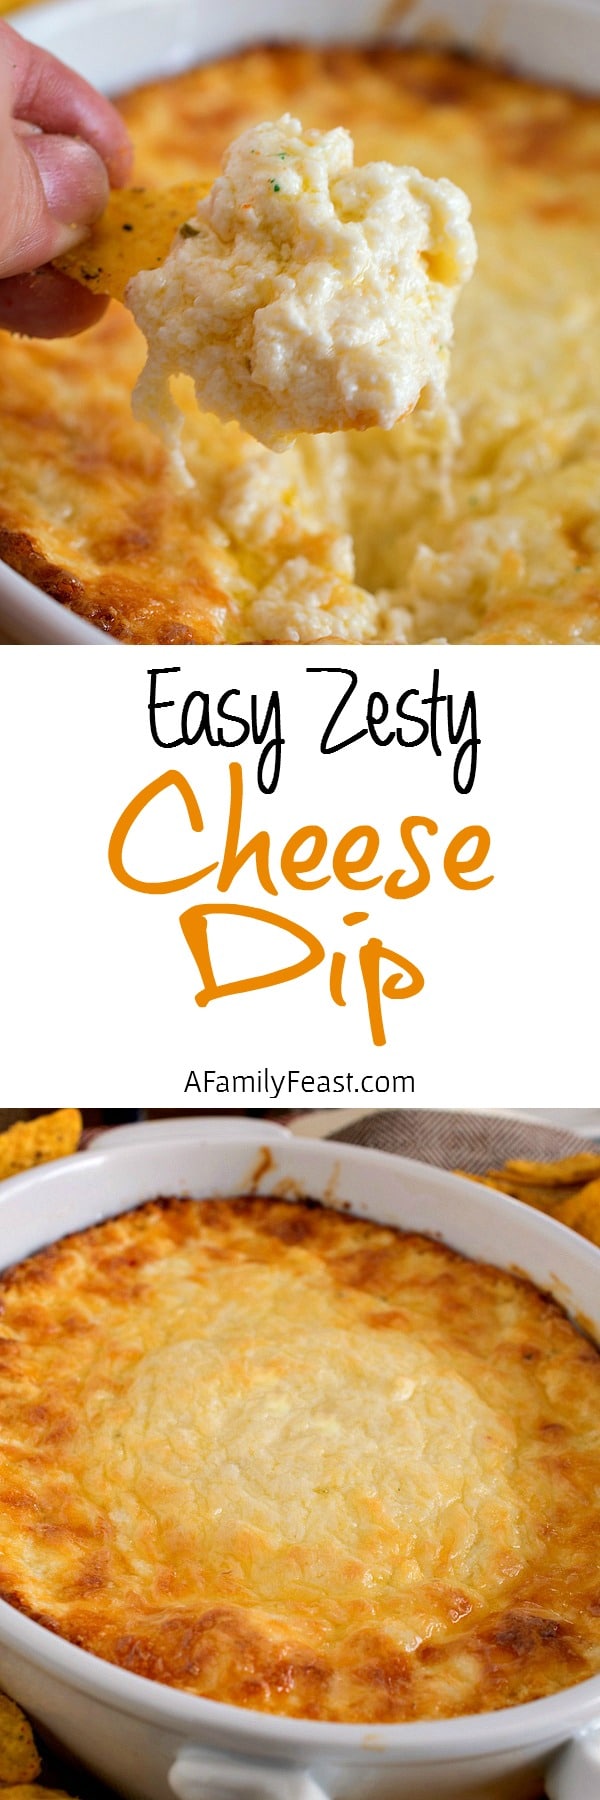 This Easy Zesty Cheese Dip is perfect for any game day or holiday party. The ultimate appetizer!